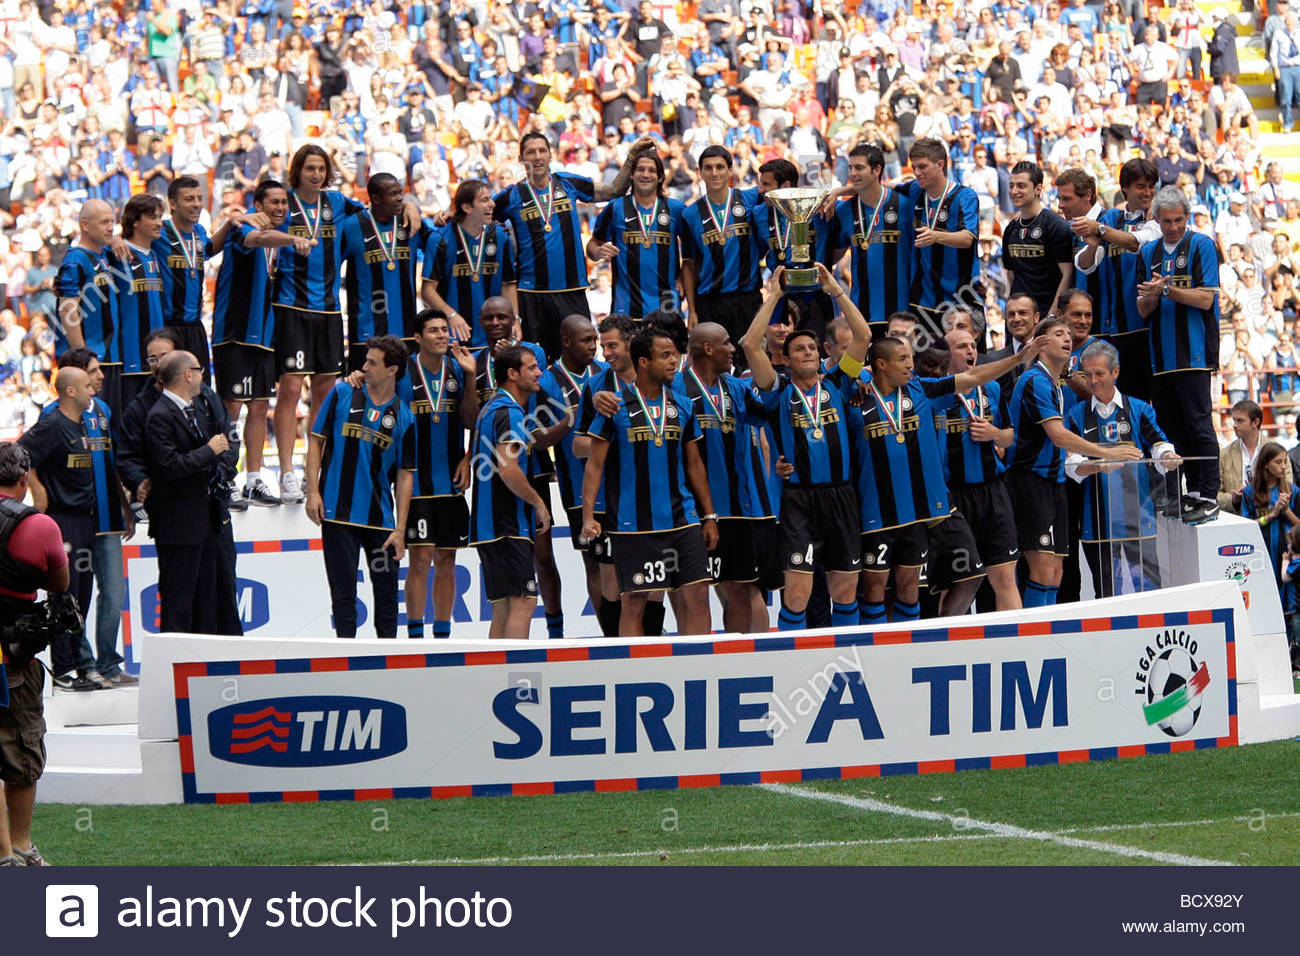 Inter Players With Cup Milano 2009 Serie A Football Championship Stock Photo Alamy